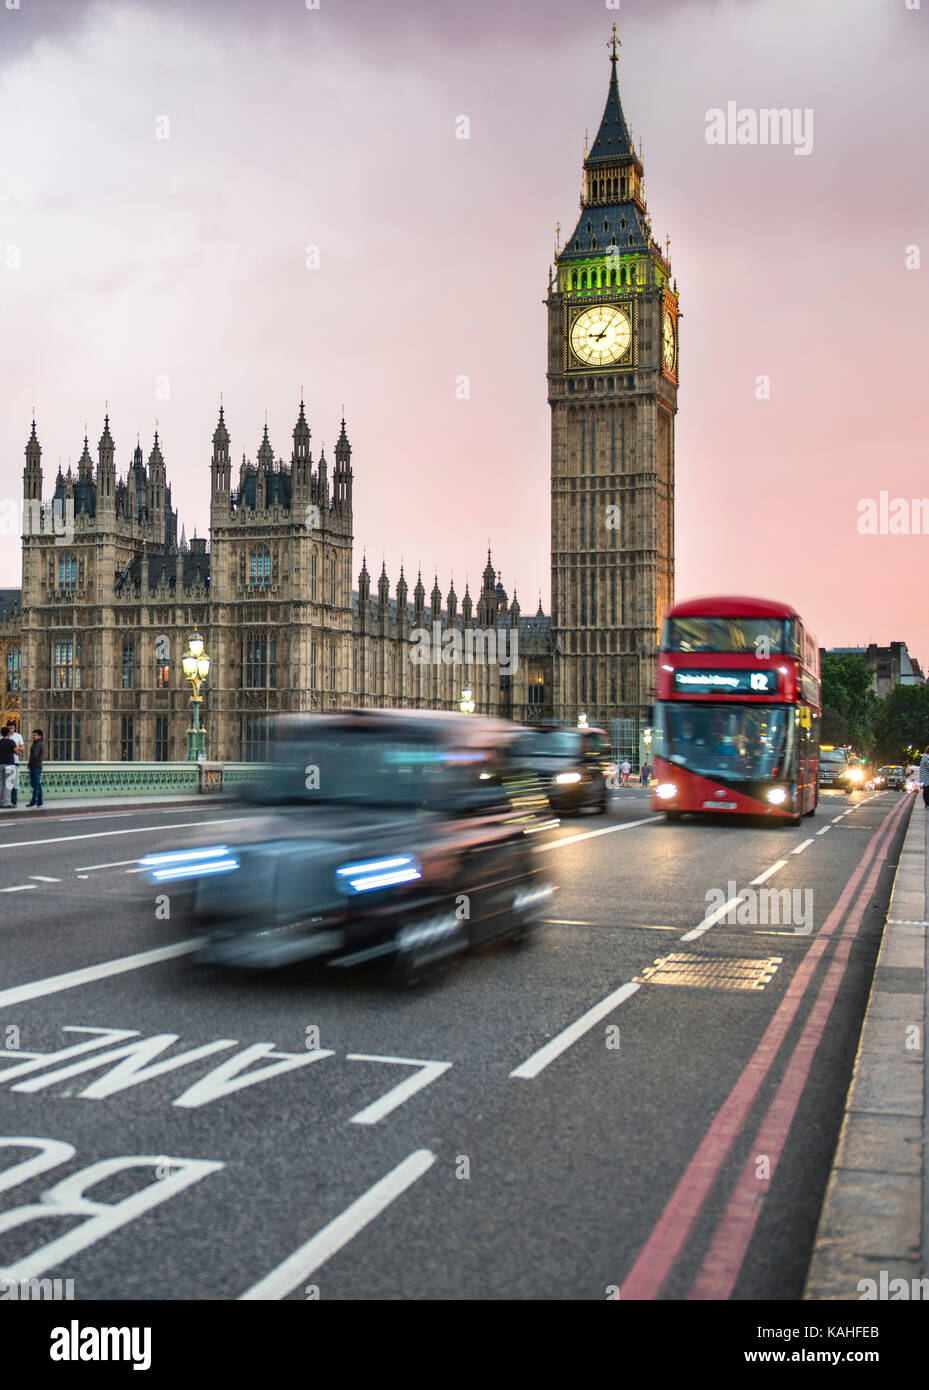 Taxi and red double-decker bus on the Westminster Bridge, Big Ben and Westminster Palace, motion blur, sunset, London, England Stock Photo